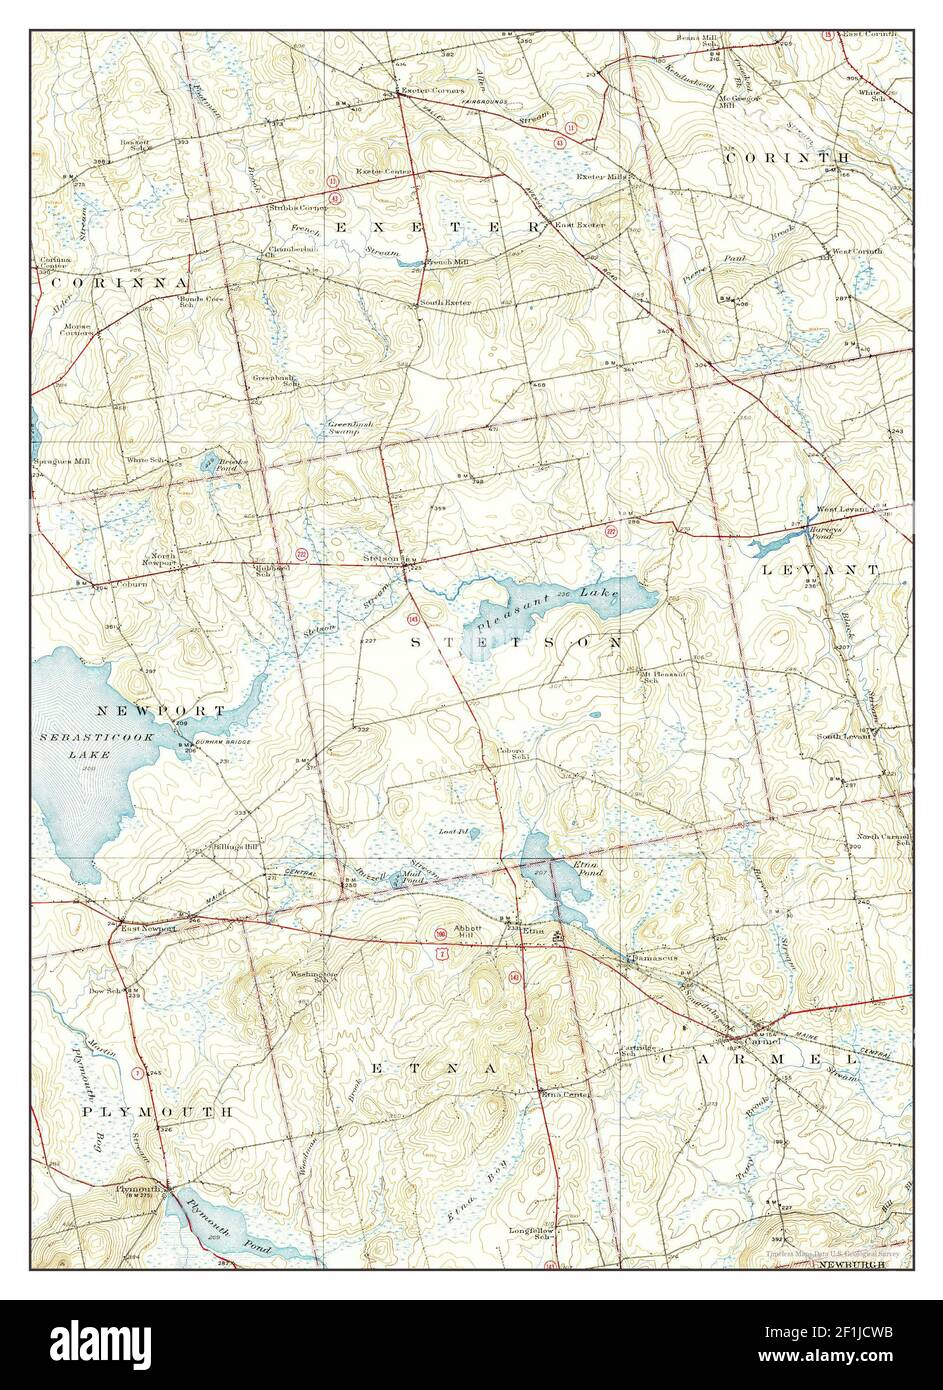 Stetson, Maine, map 1935, 1:62500, United States of America by Timeless Maps, data U.S. Geological Survey Stock Photo